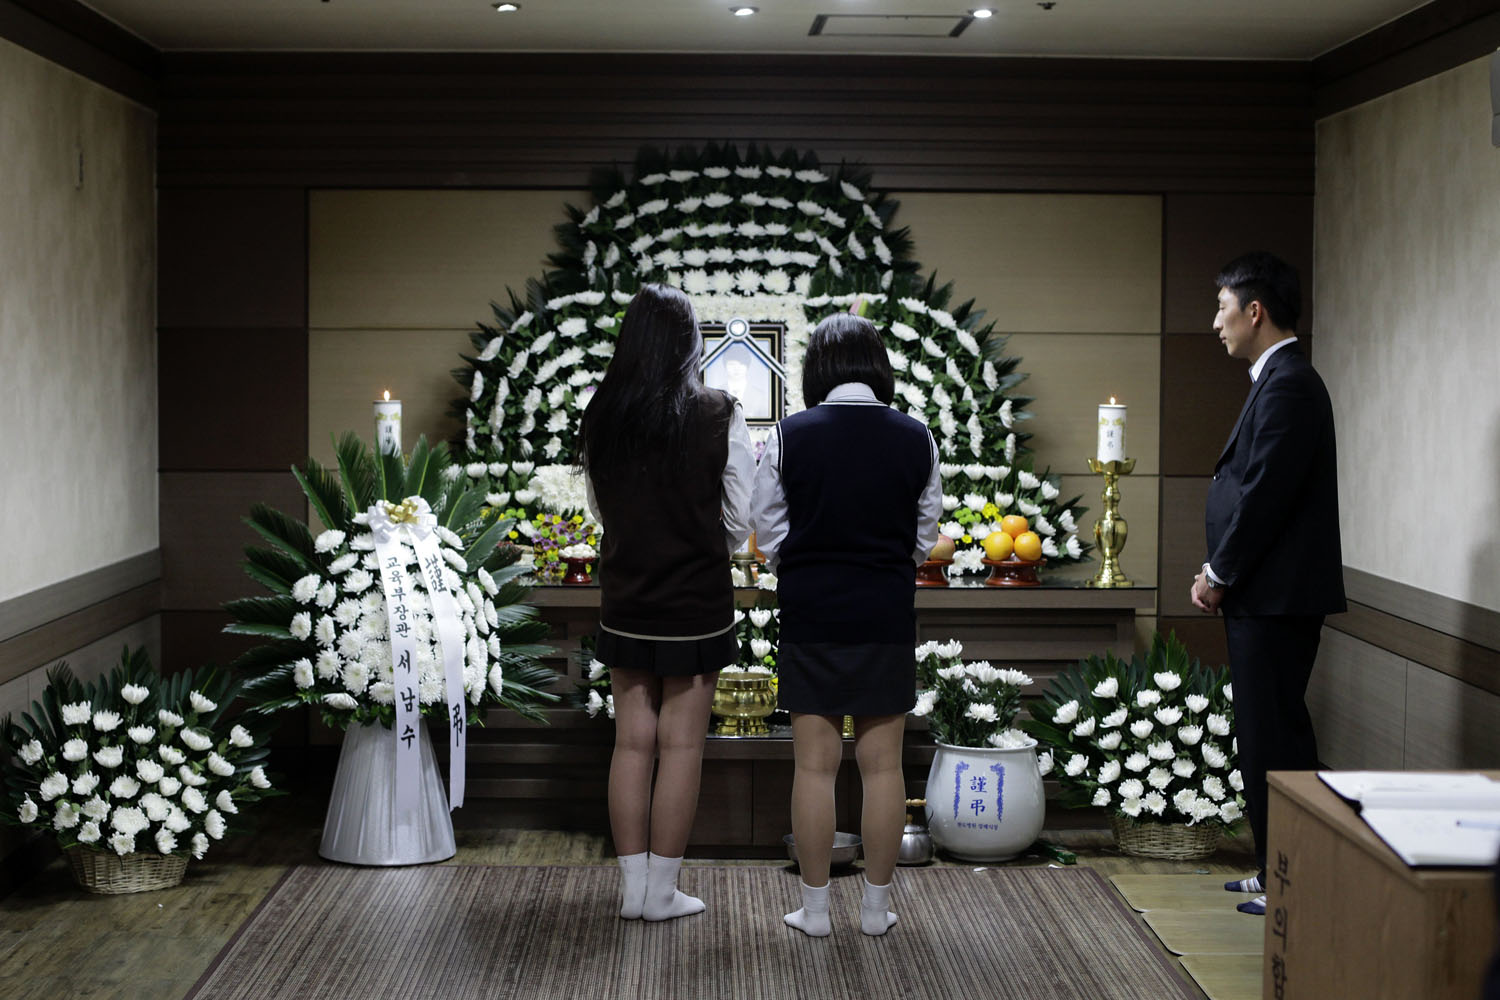 Apr. 18, 2014. Danwon High School students attend the funeral of Lee Da-woon, a victim of the sunken Sewol ferry accident, in Ansan, South Korea.